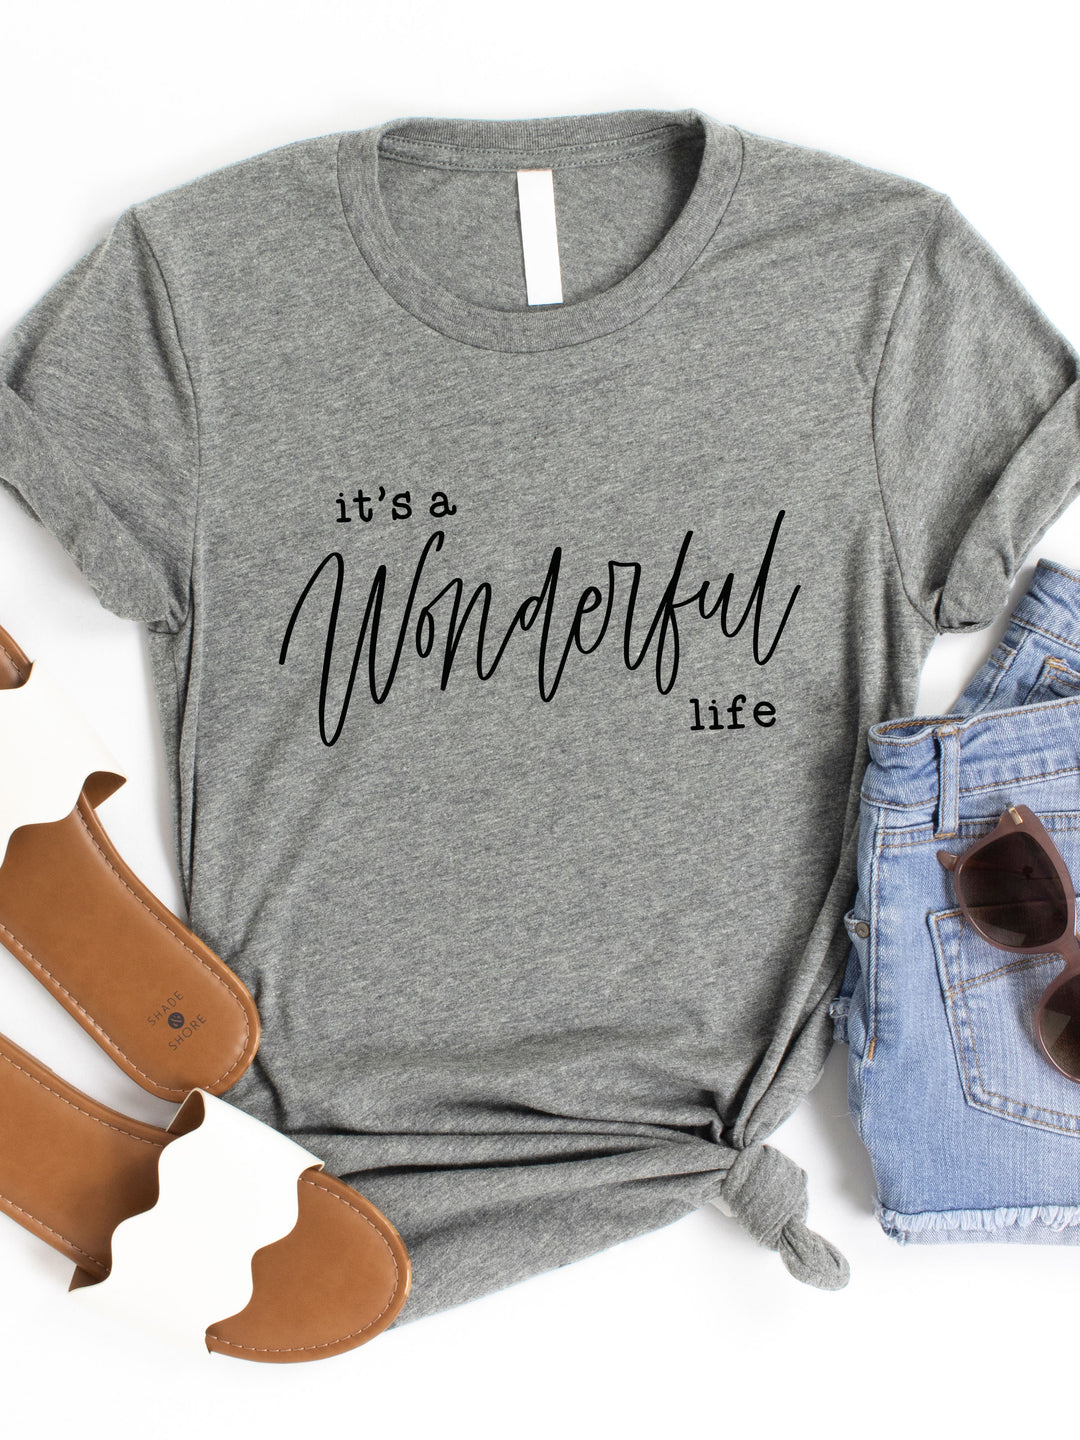 It's a Wonderful Life Graphic Tee